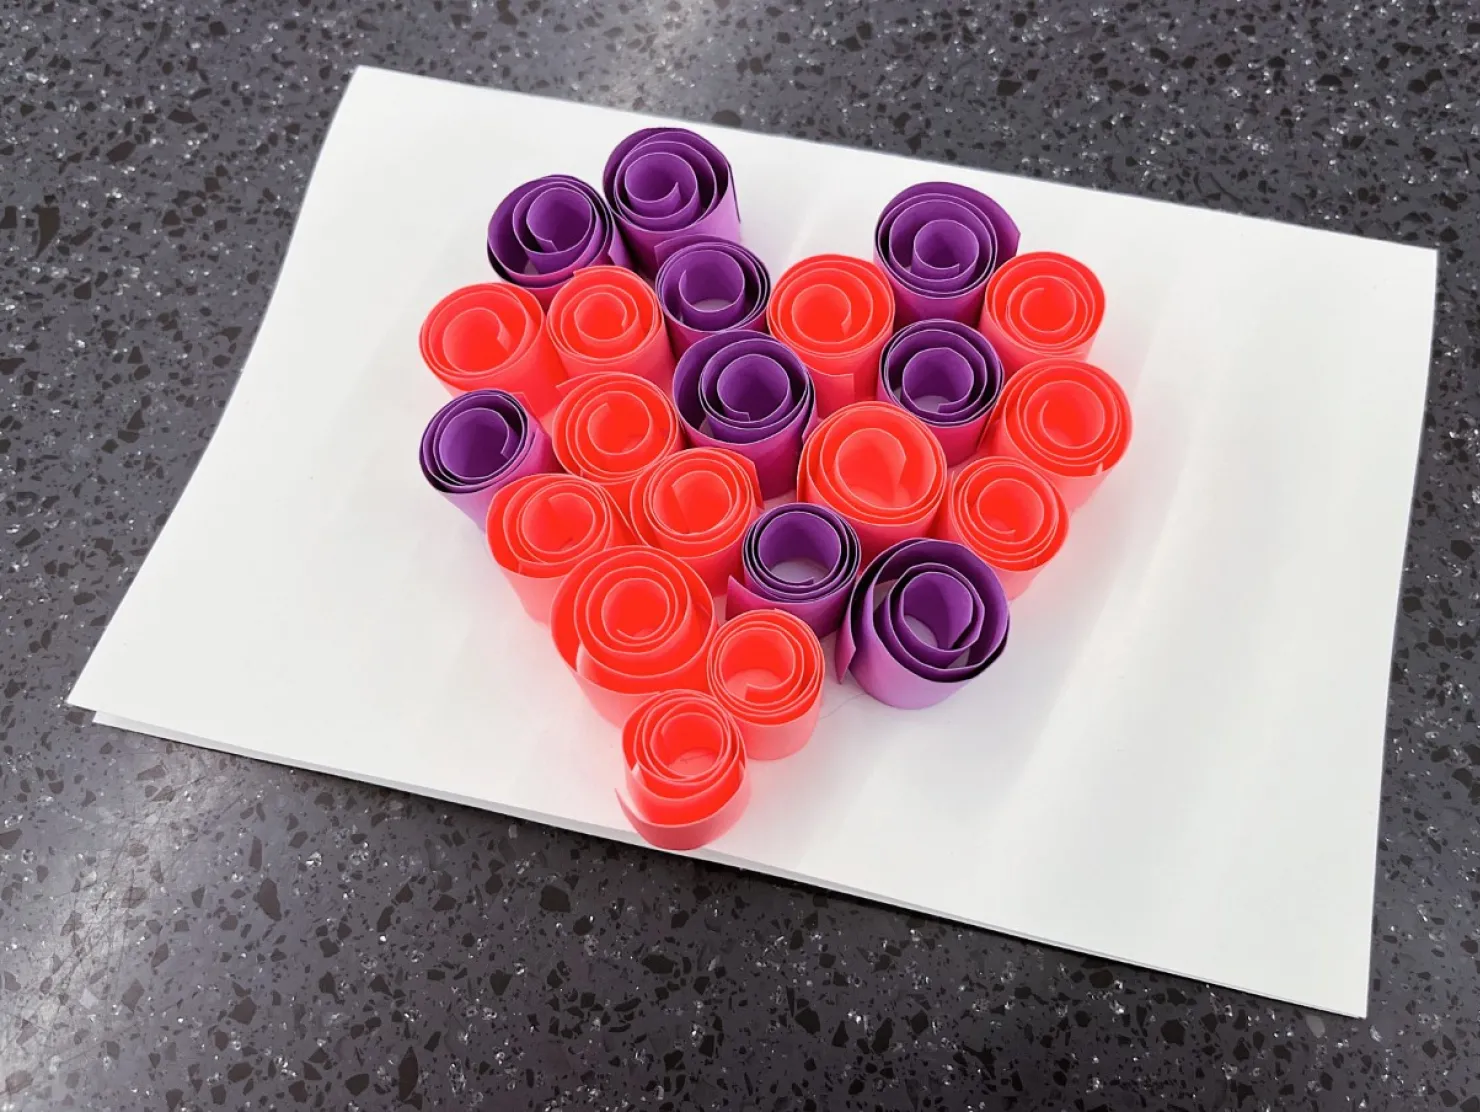 DIY Heart-shaped Paper Quilling : 6 Steps (with Pictures) - Instructables